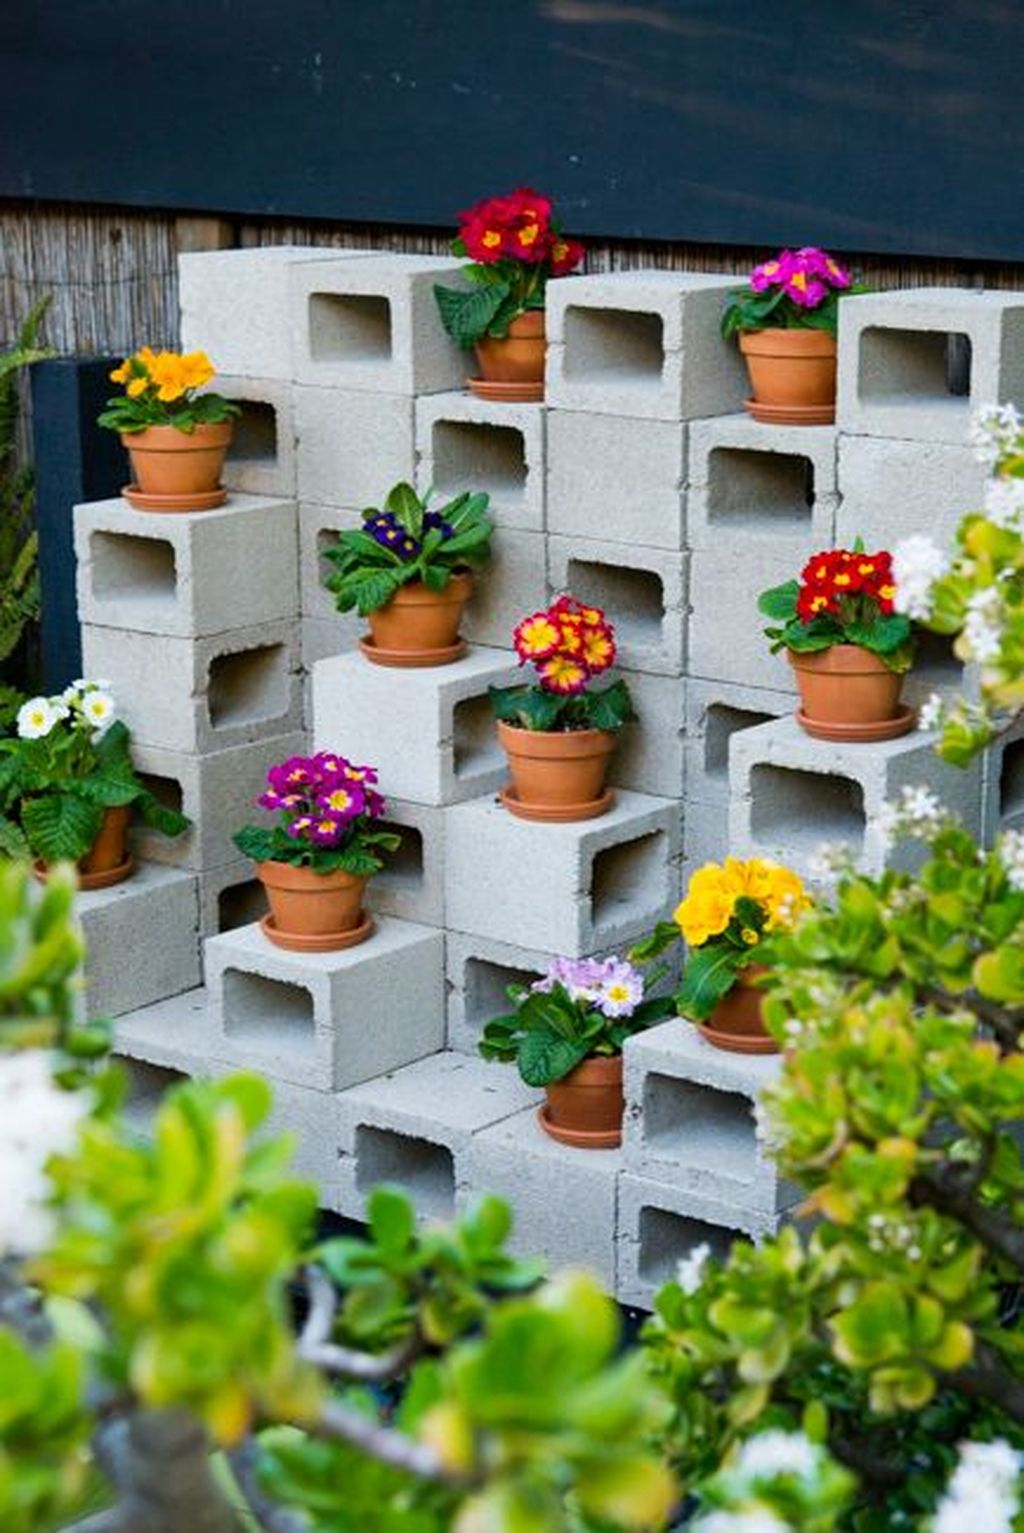 Stylish Garden Design Ideas With Cinder Block To Try 16